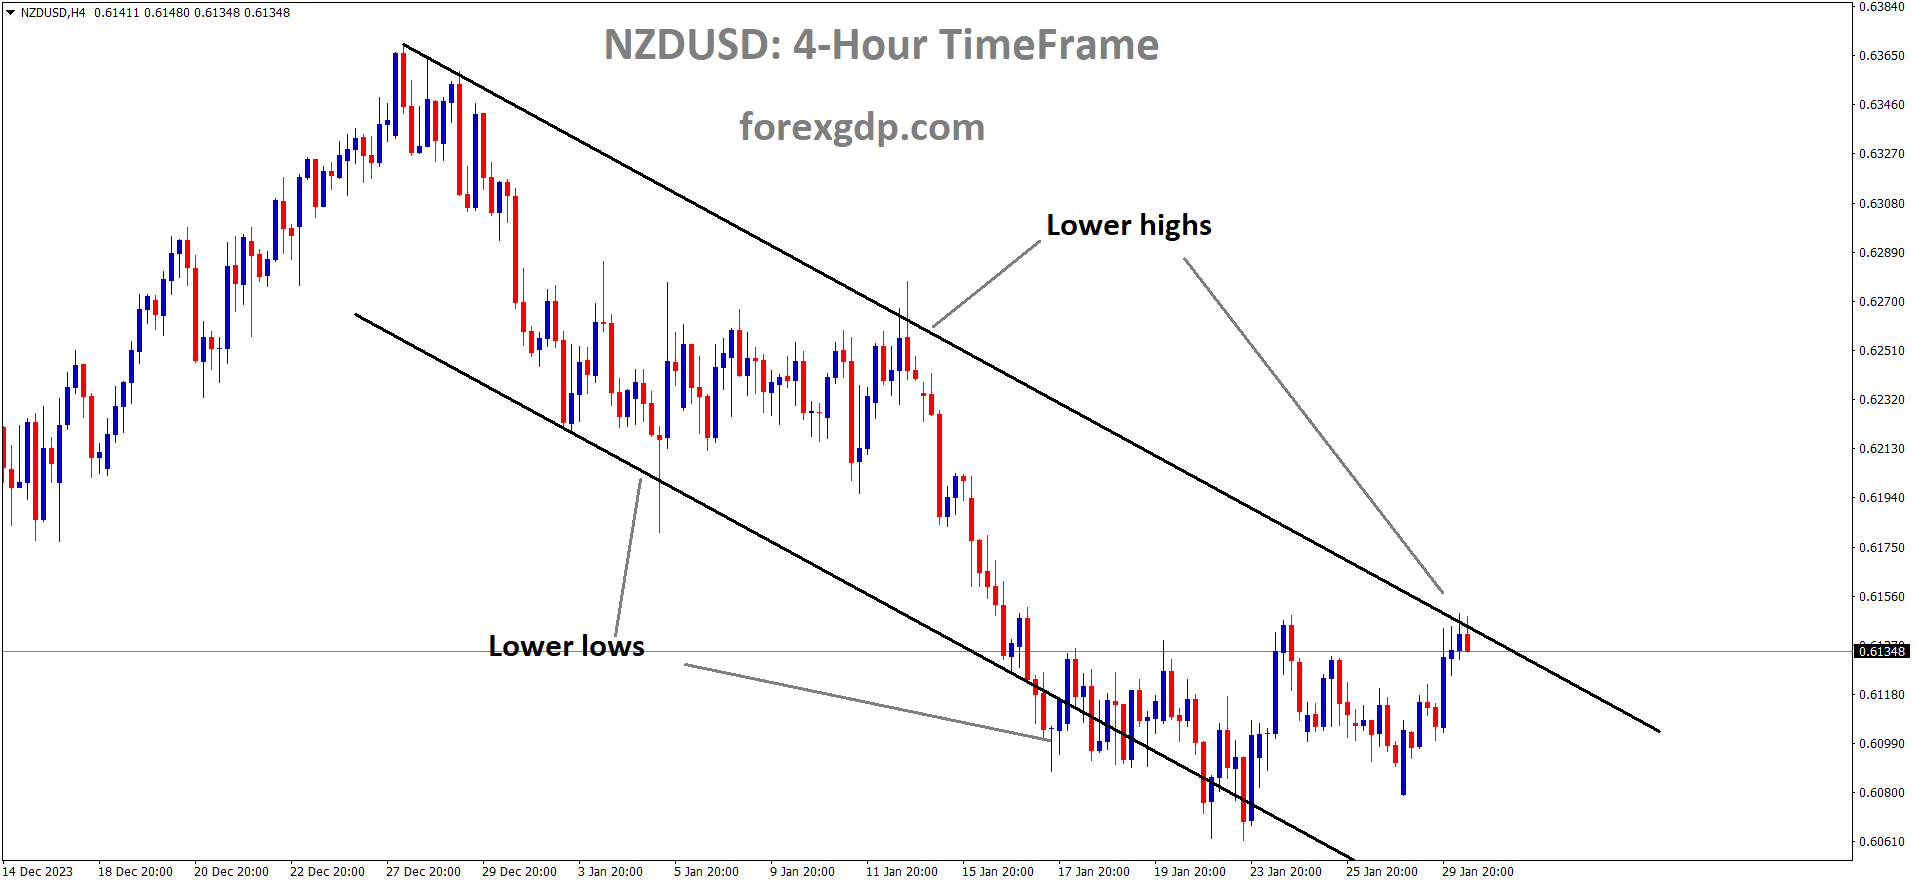 NZDUSD is moving in the Descending channel and the market has reached the lower high area of the channel